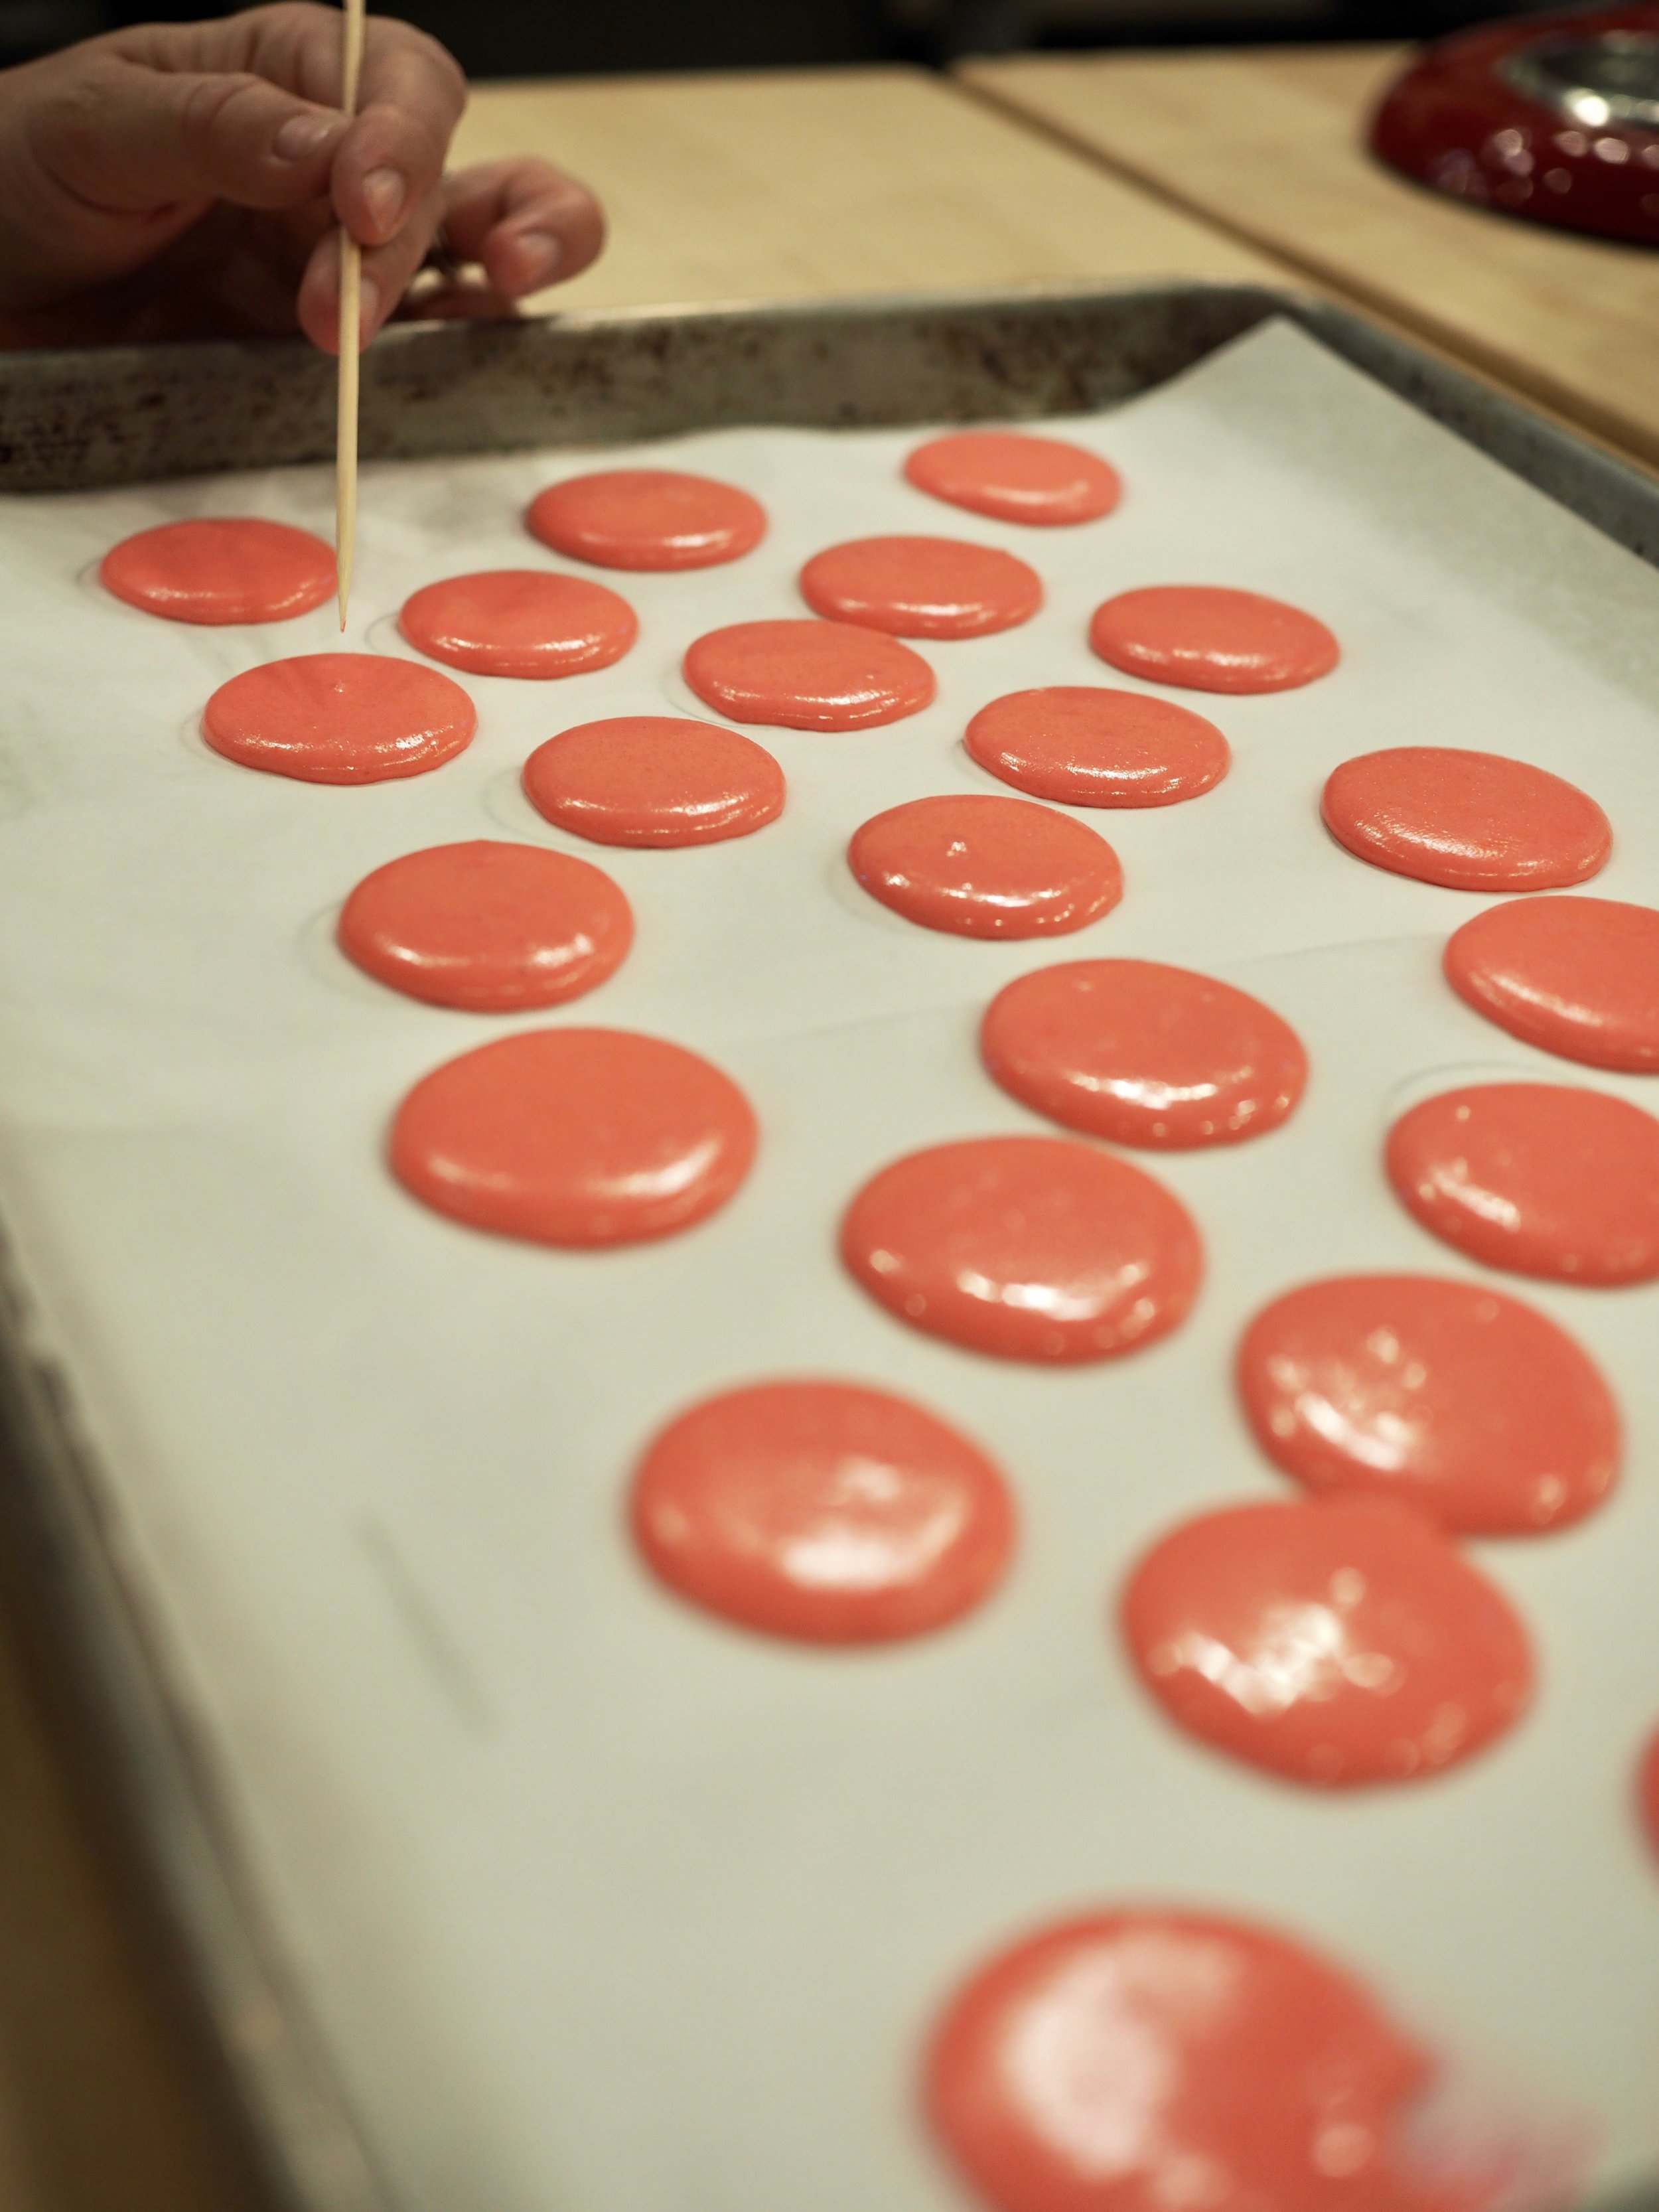 Now popping the air bubbles (and cleaning up and macarons which have merged)